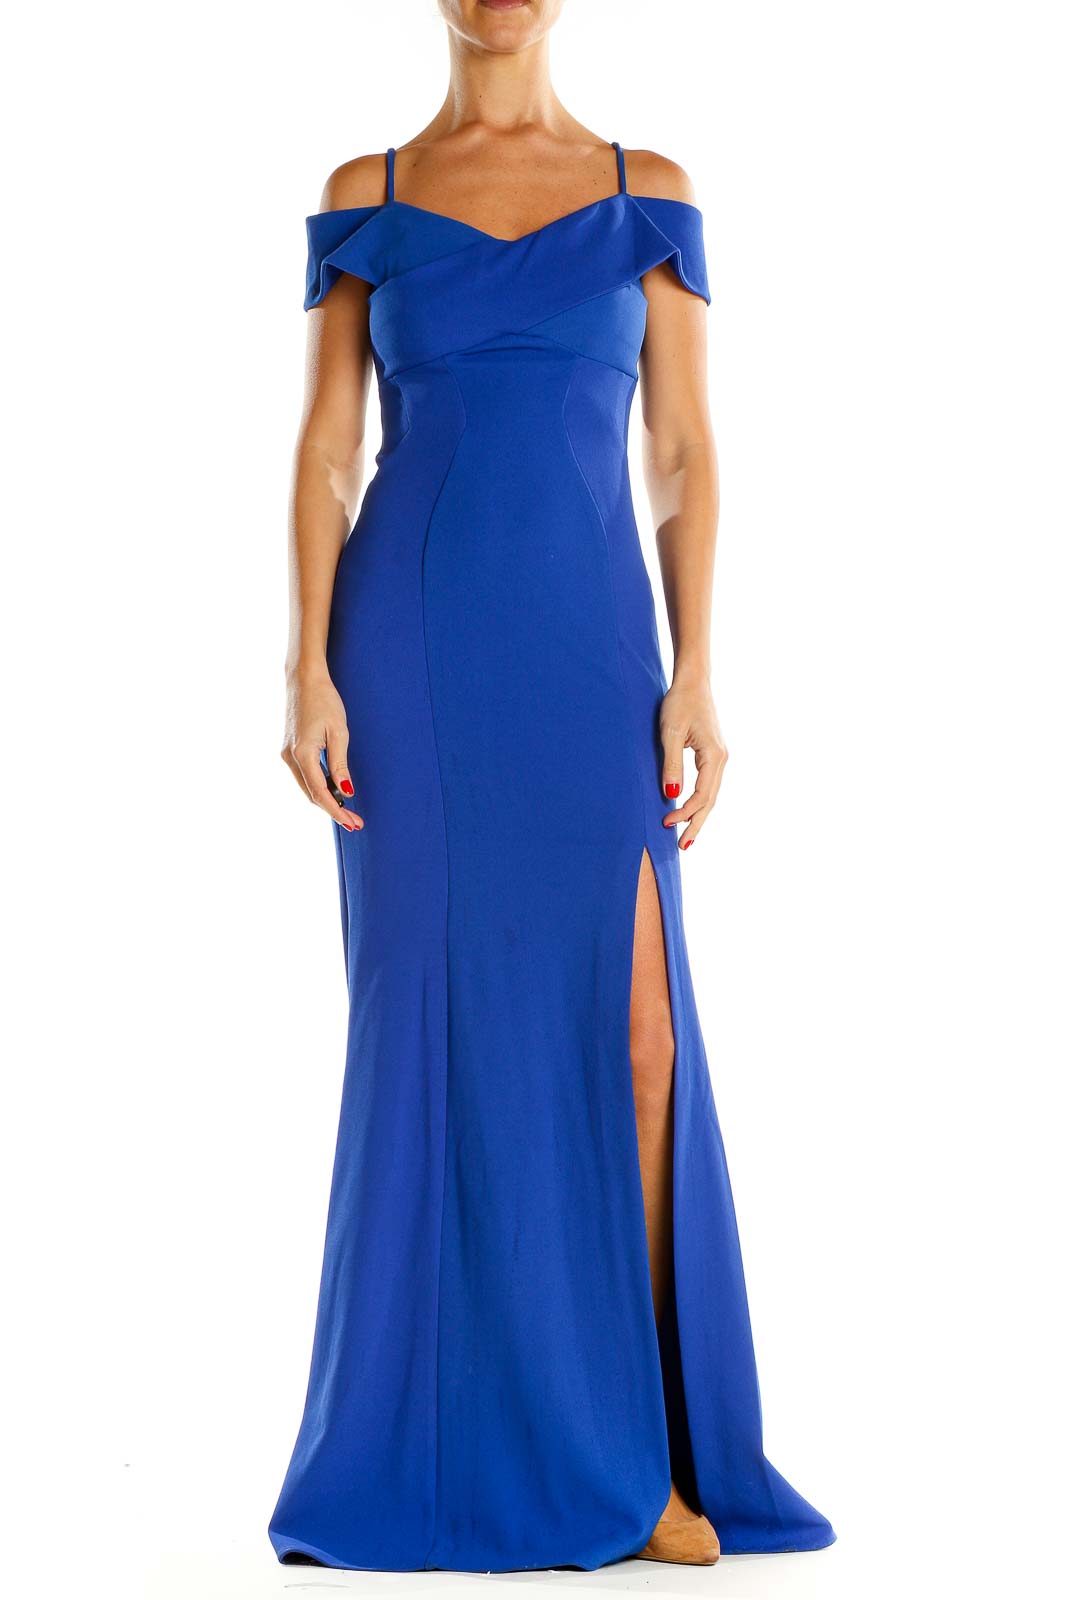 Blue Cocktail Evening Mermaid Dress Front